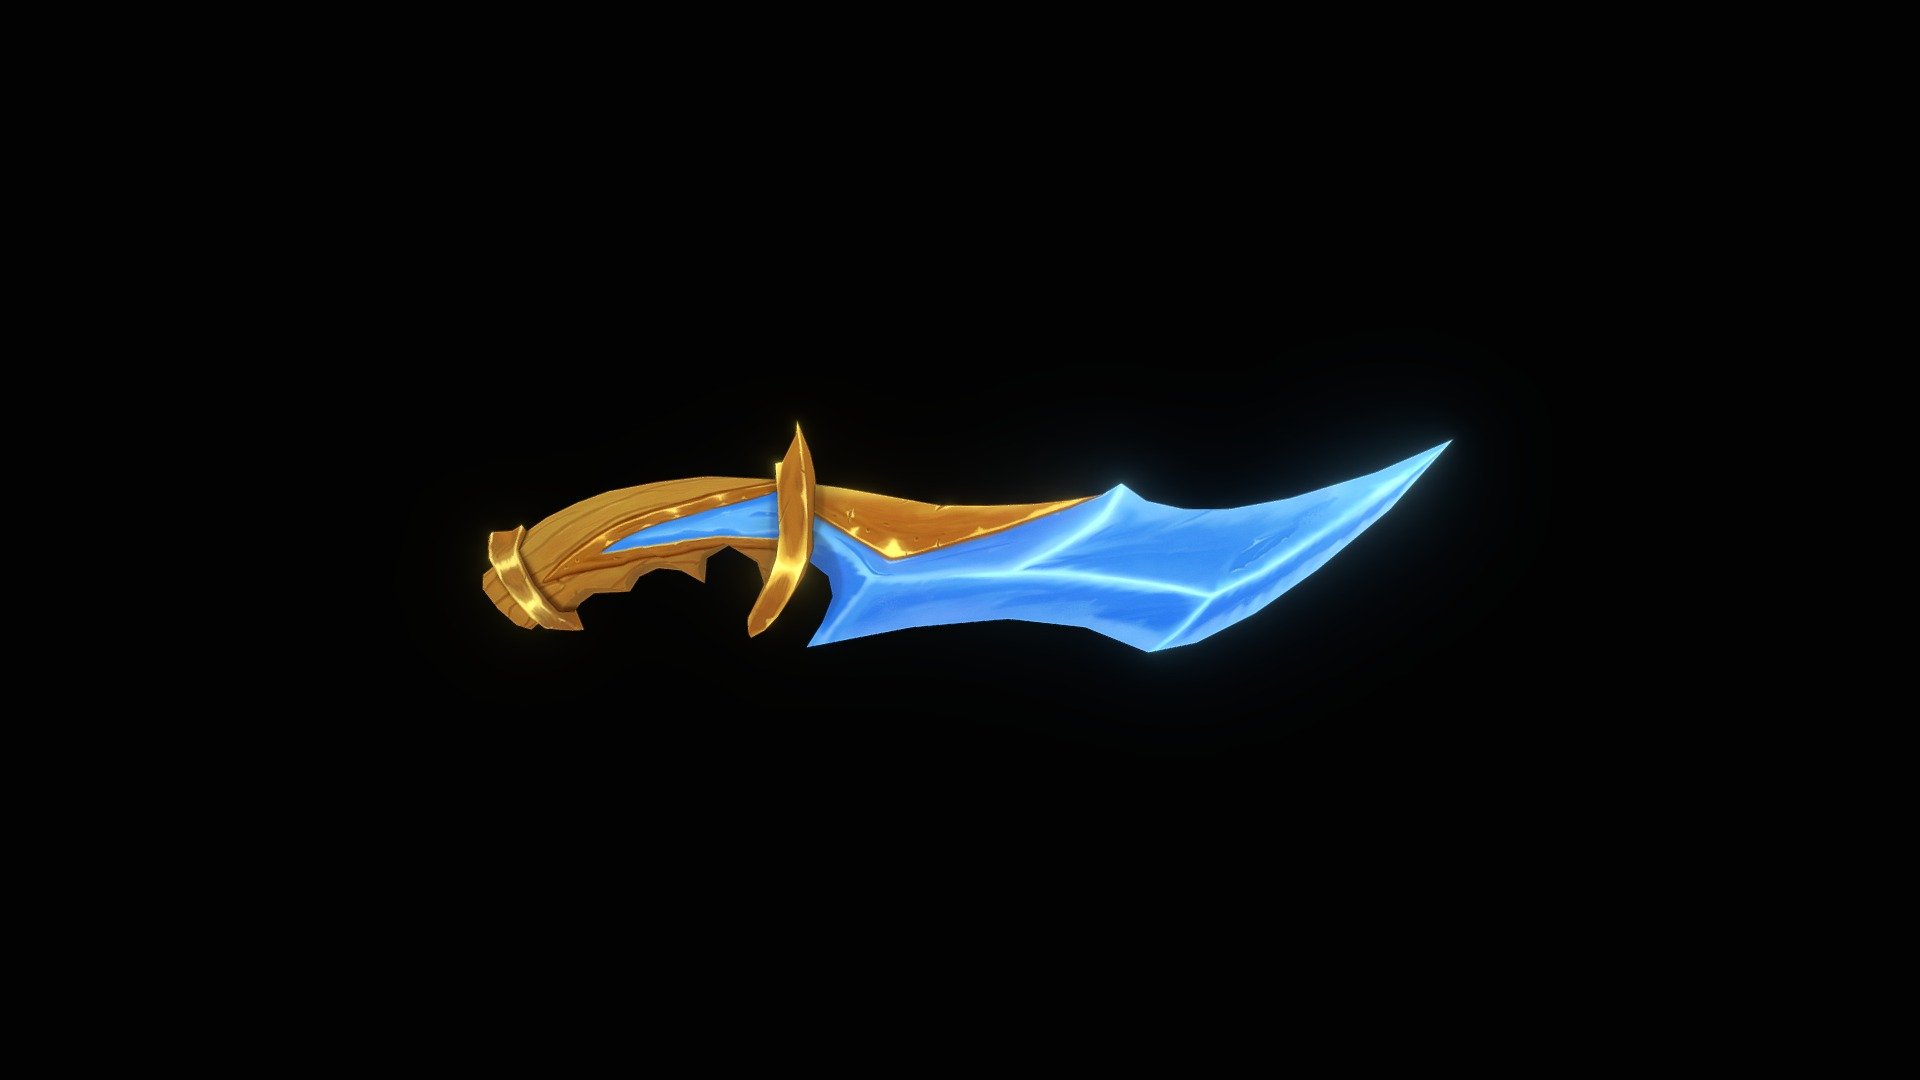 Did this stylized Dagger for practicing stylized painting! I found the main concept online, though the color theme was diffrent. 
I used Blender for Modeling, 3DCoat and Photoshop for texturing painting 3d model